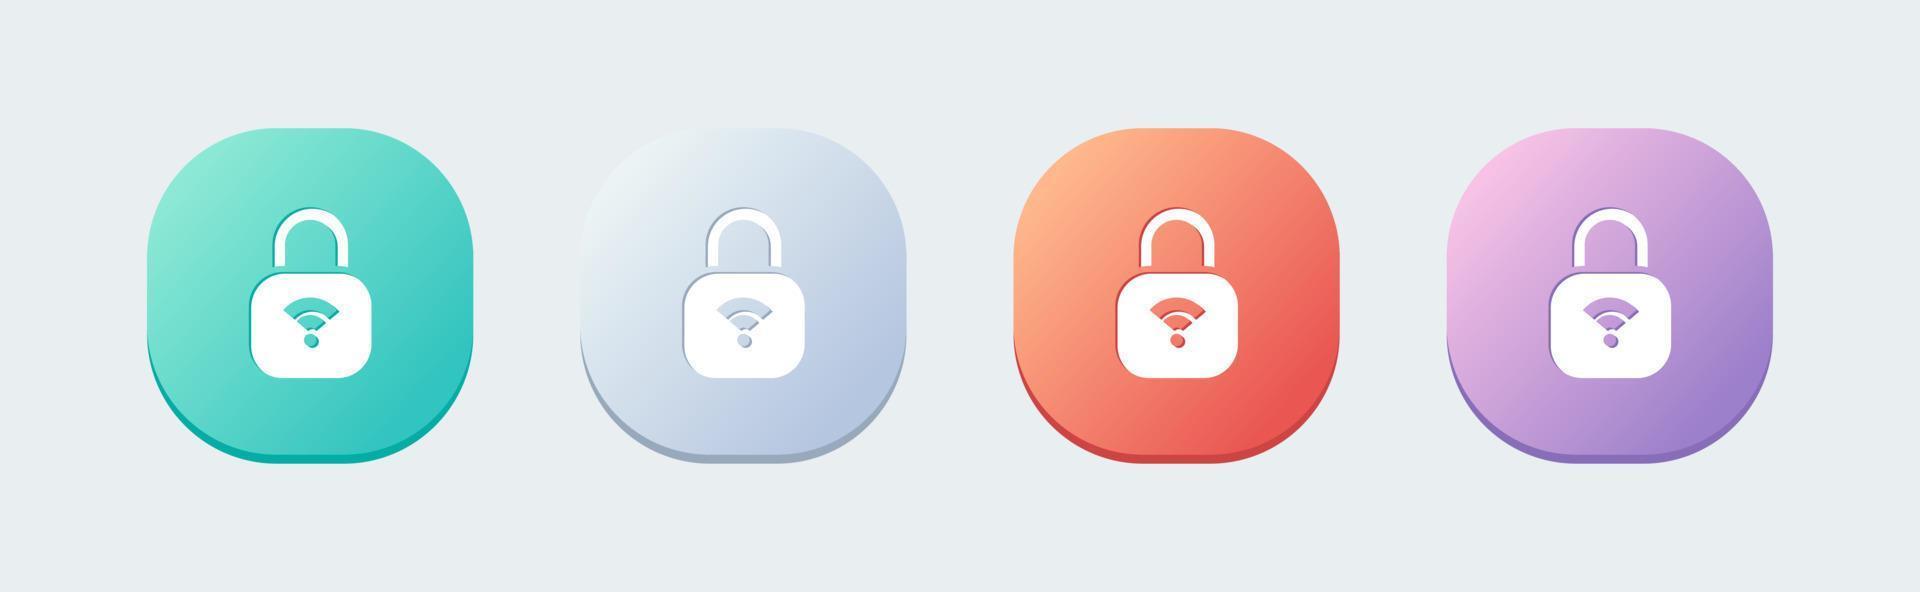 Padlock solid icon in flat design style. Security signs vector illustration.